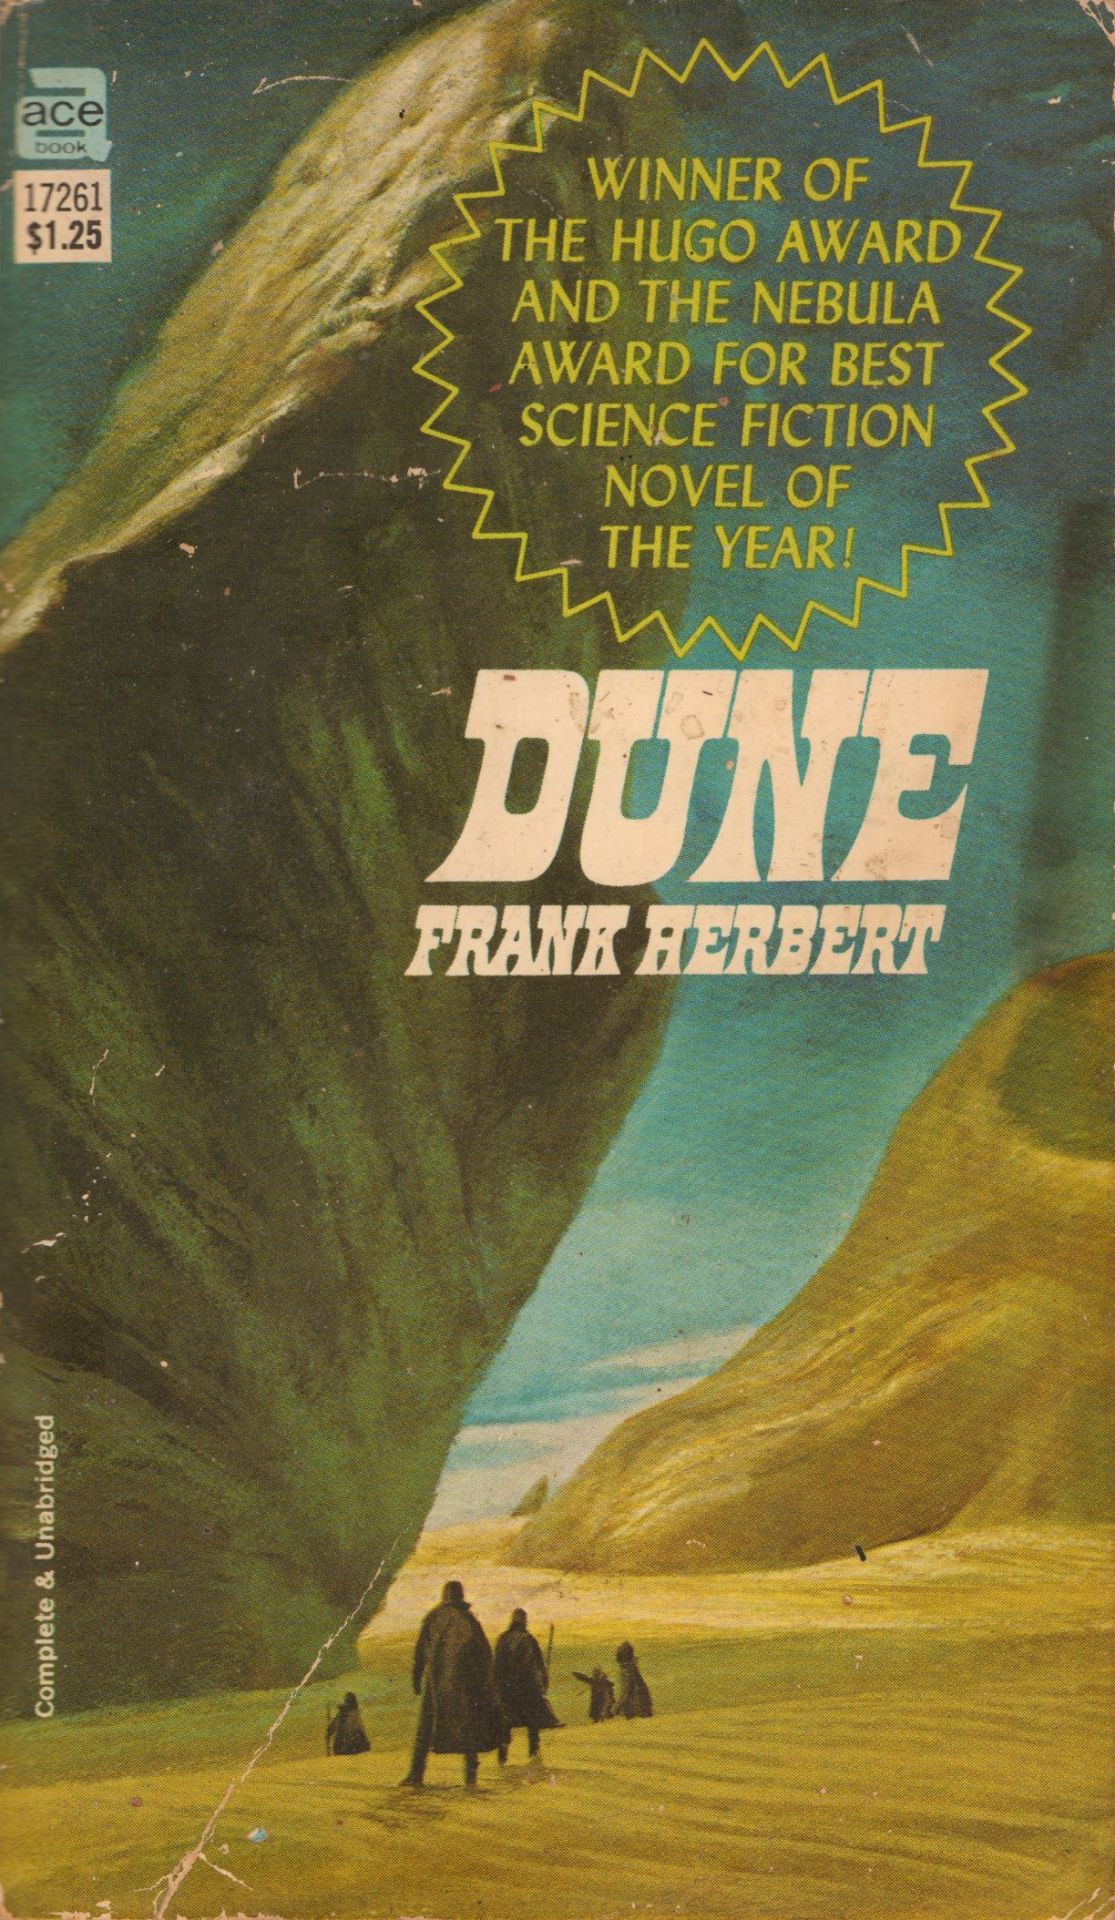 scificovers: Ace 17261: Dune by Frank Herbert. Cover by John Schoenherr. among